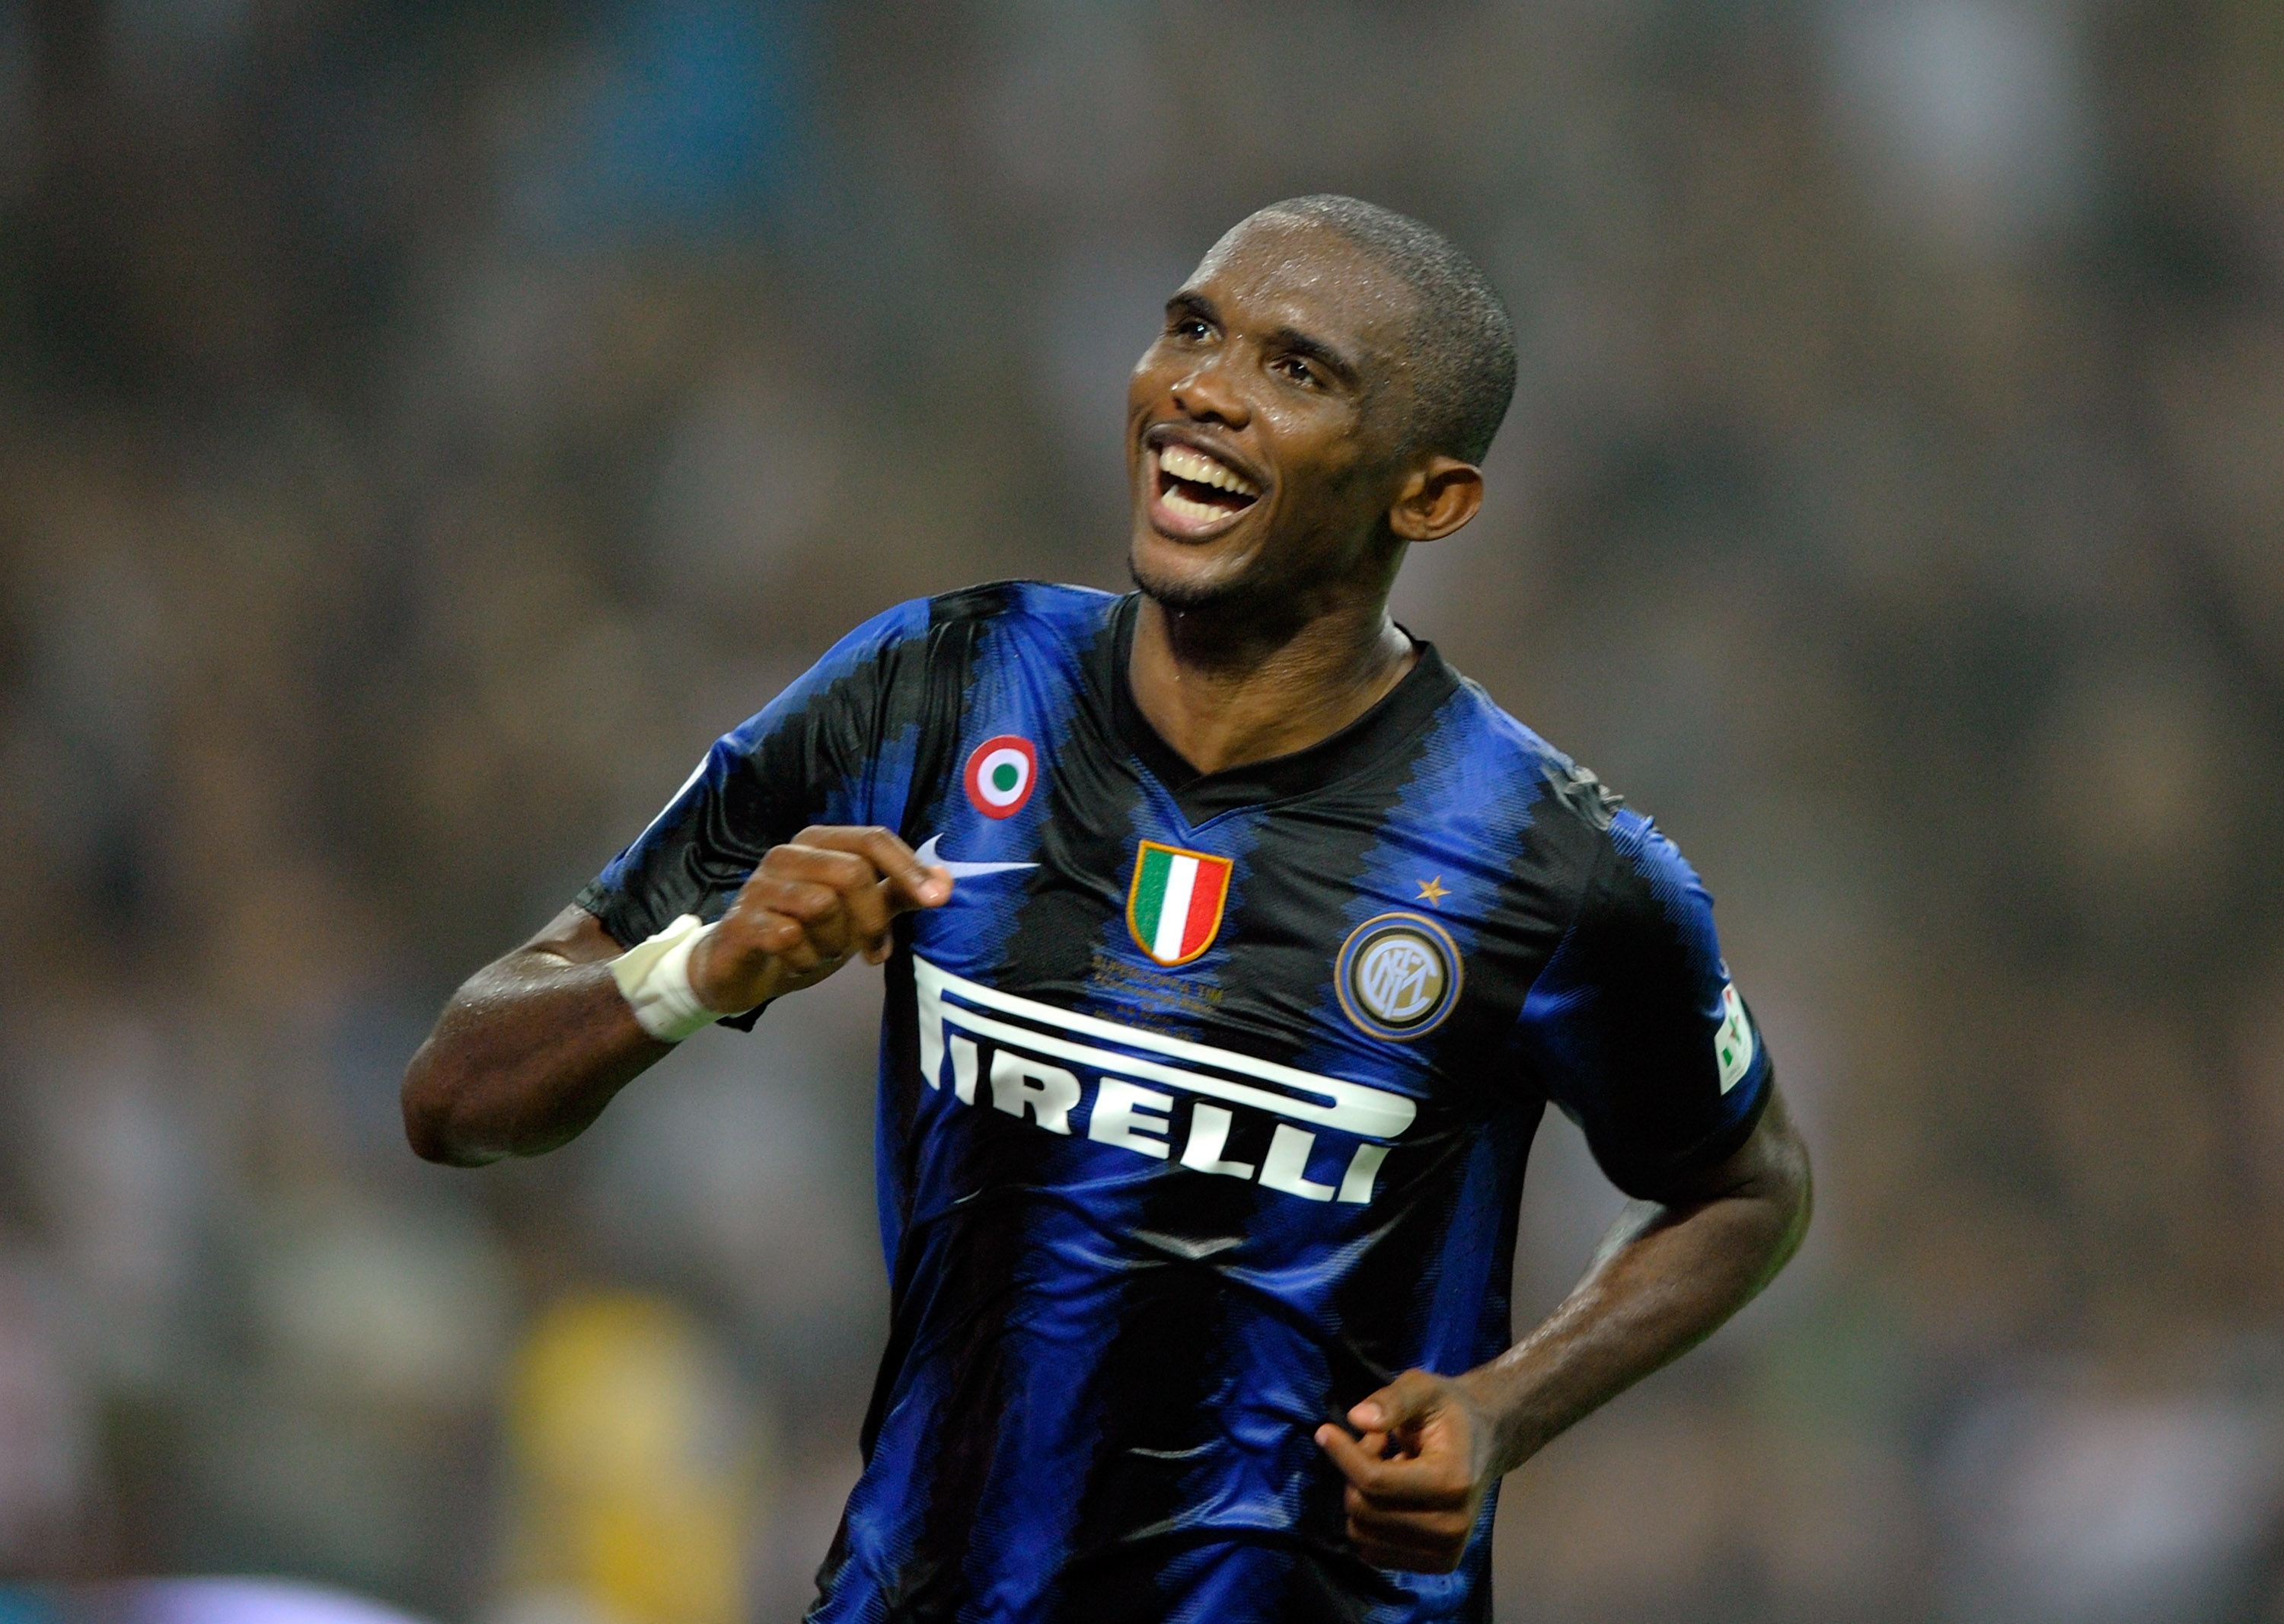 MILAN, ITALY - AUGUST 21:  Samuel Eto'o of FC Internazionale Milano celebrates after the second goal during the Supercoppa Italiana match between Inter and Roma at Giuseppe Meazza Stadium on August 21, 2010 in Milan, Italy.  (Photo by Claudio Villa/Getty 